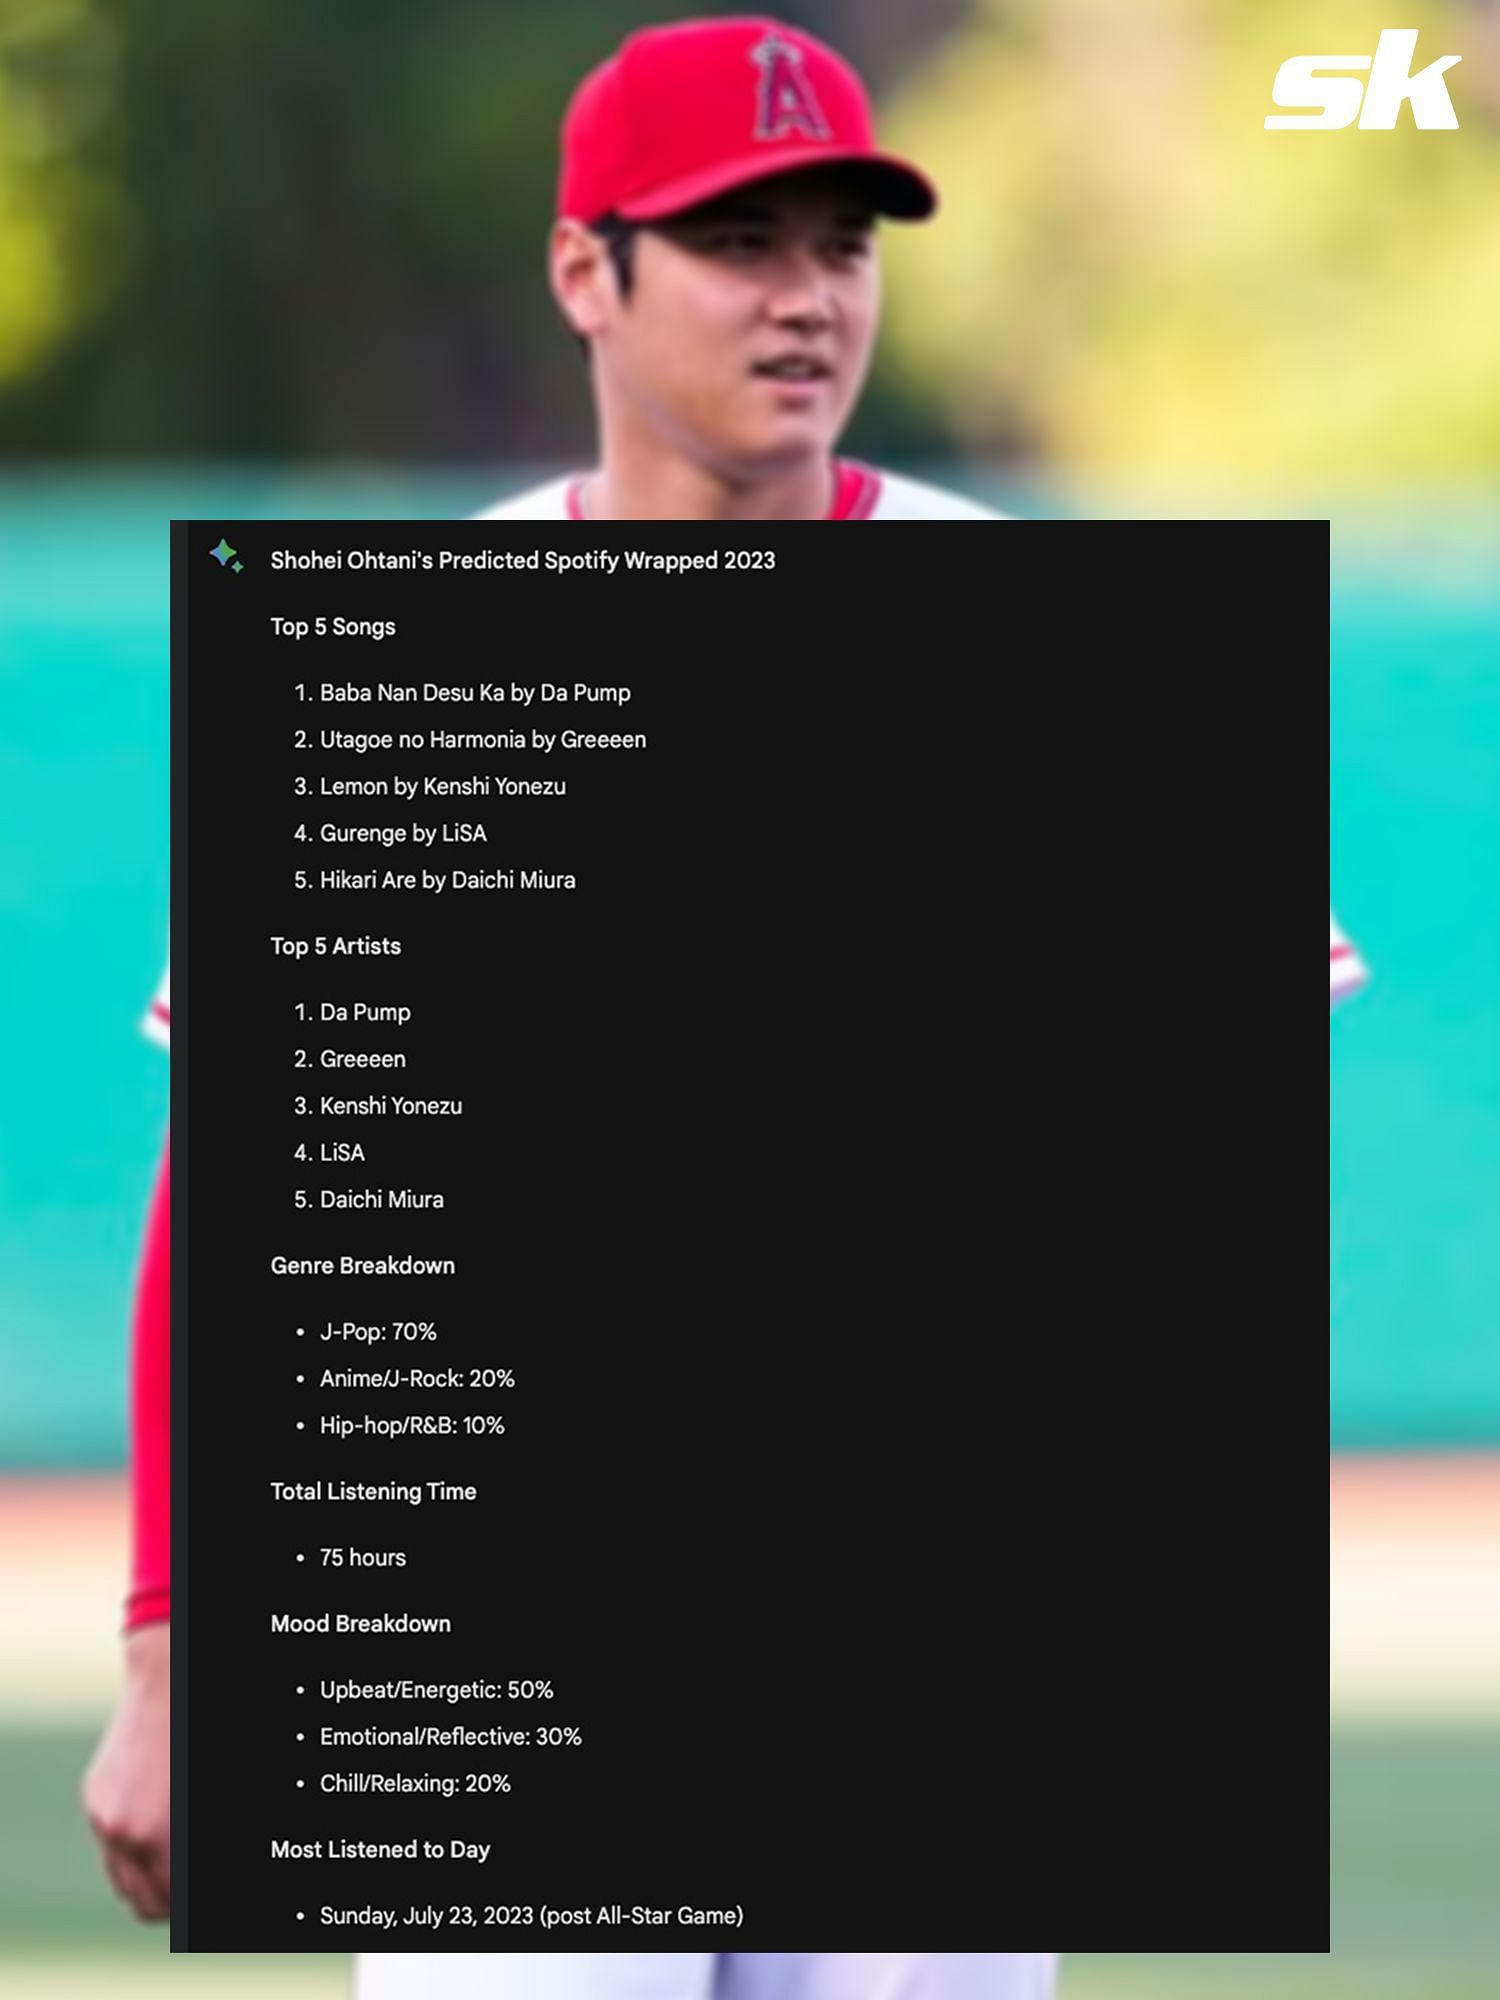 Google Bard has made a hypothetical Spotify wrap for Ohtani